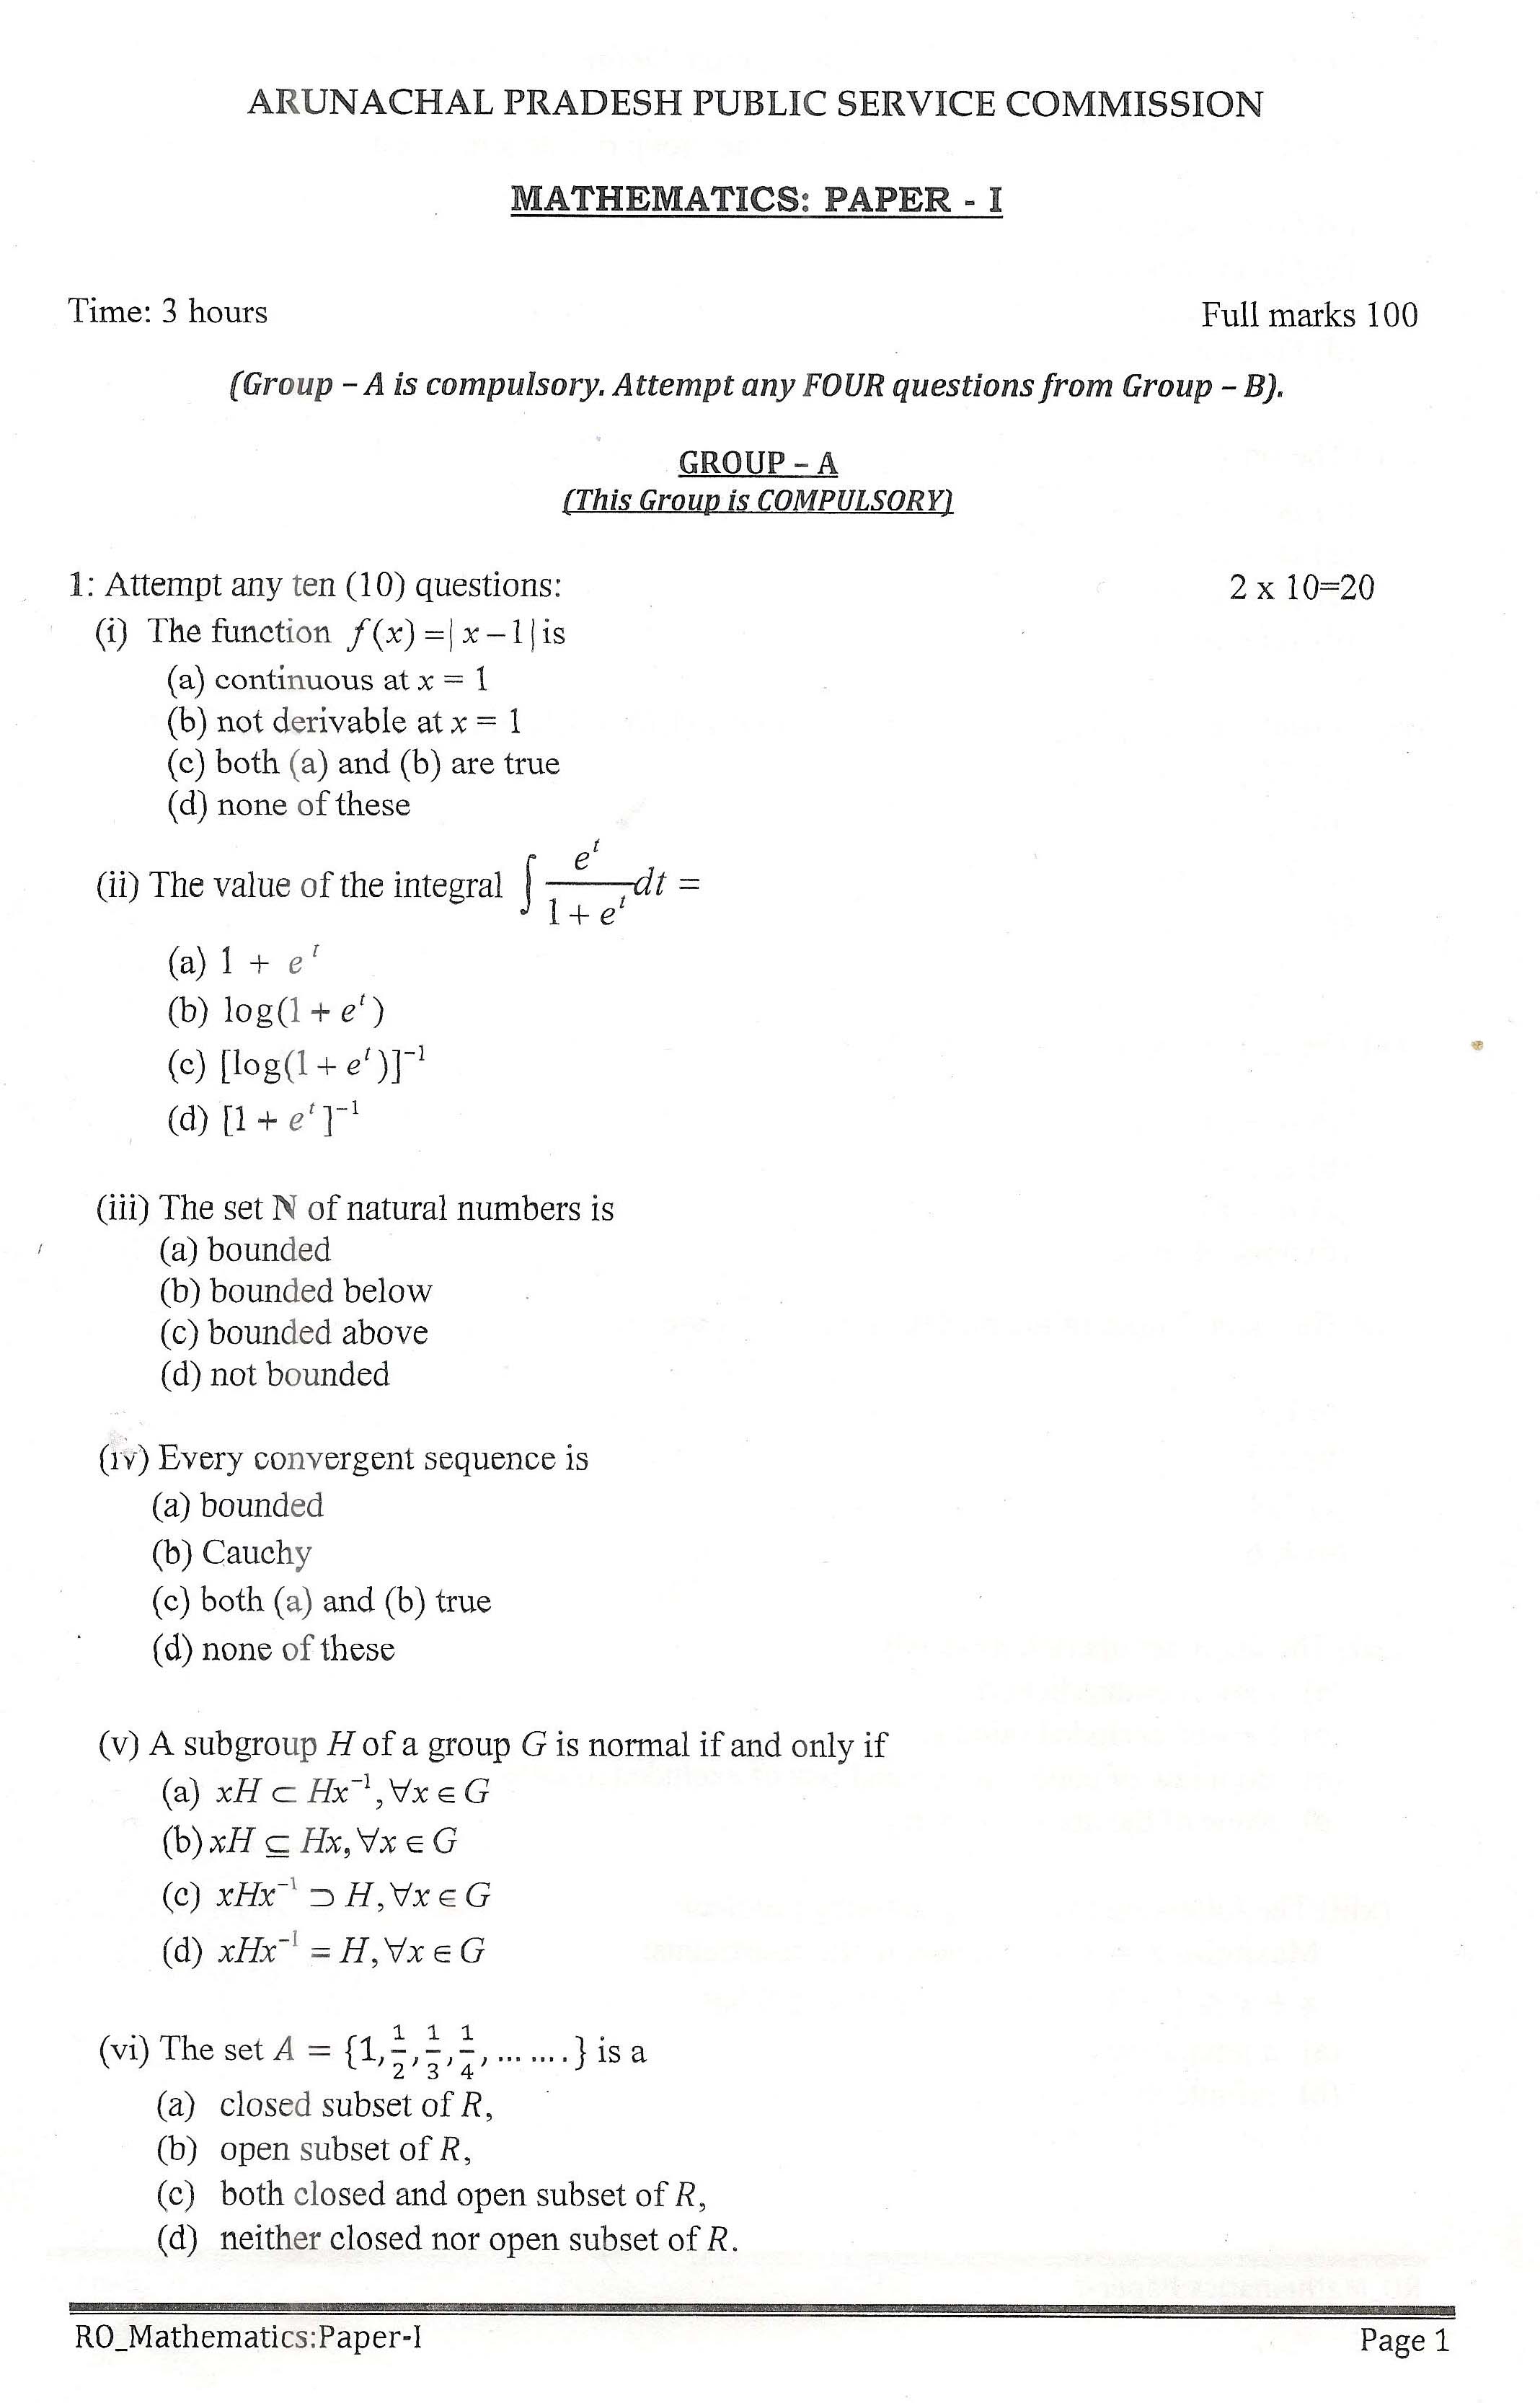 APPSC Research Officer Mathematics Paper I Exam Question Paper 2014 1